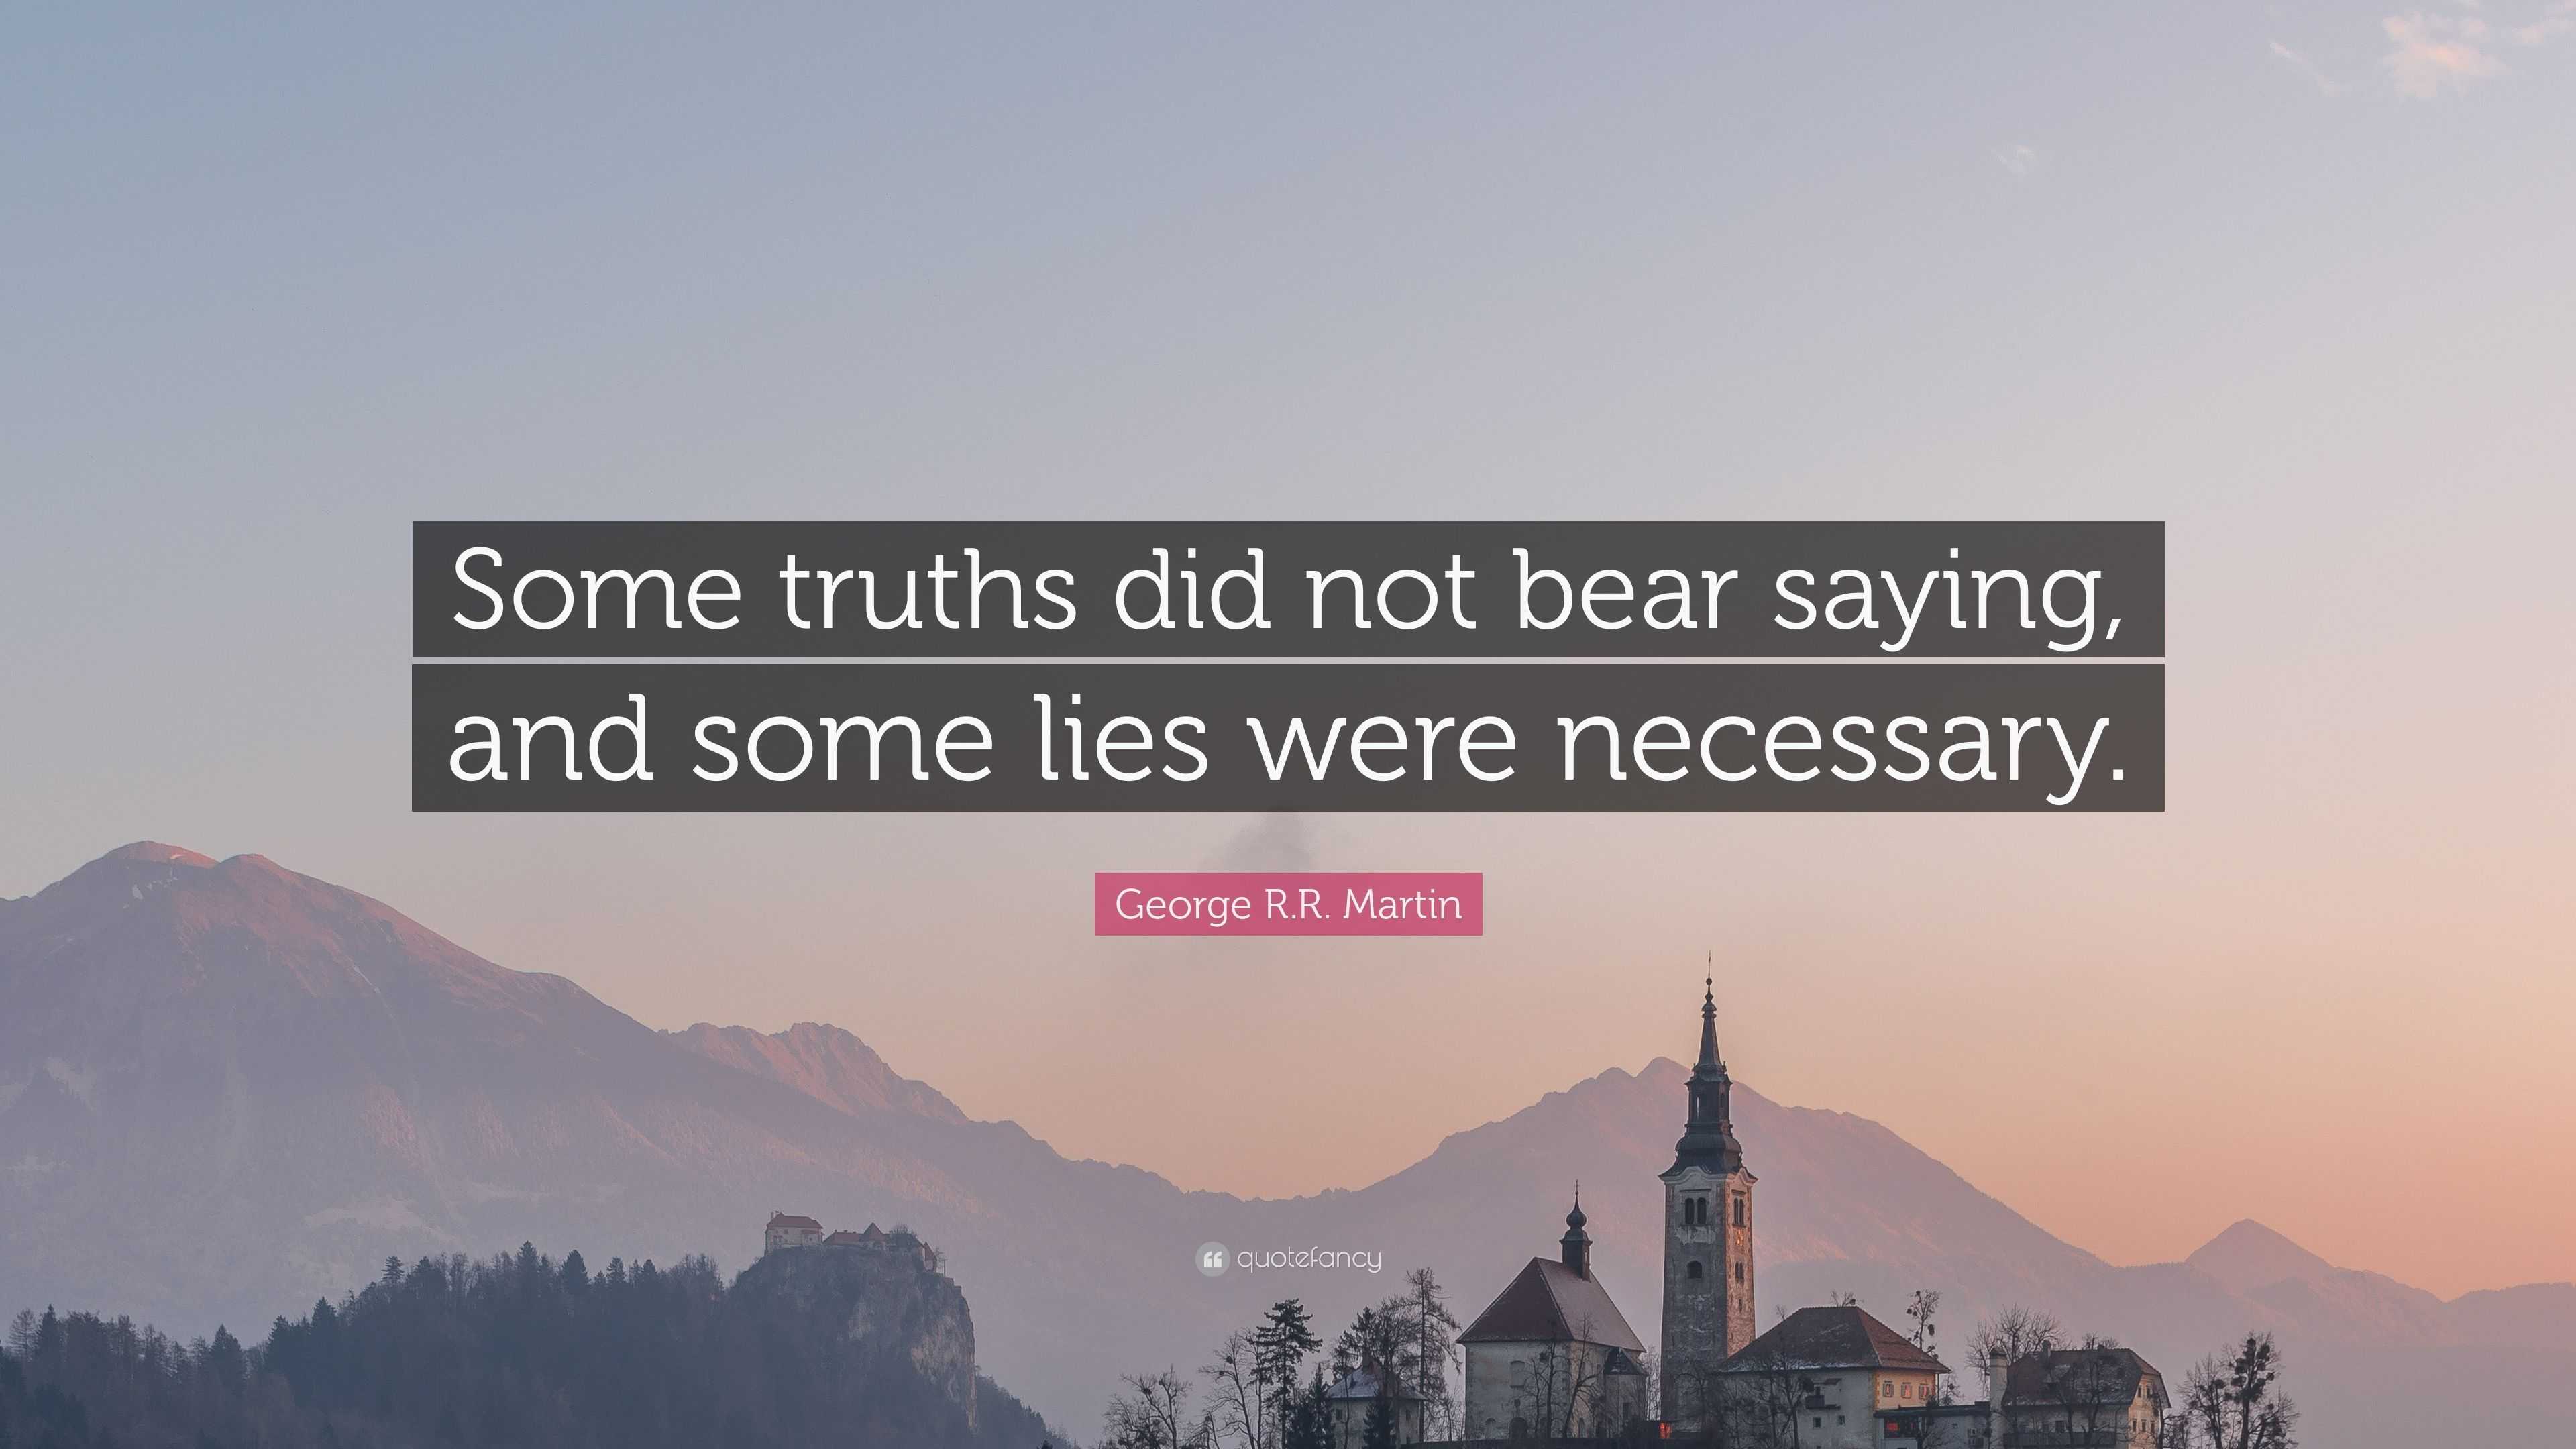 George R.R. Martin Quote: “Some truths did not bear saying, and